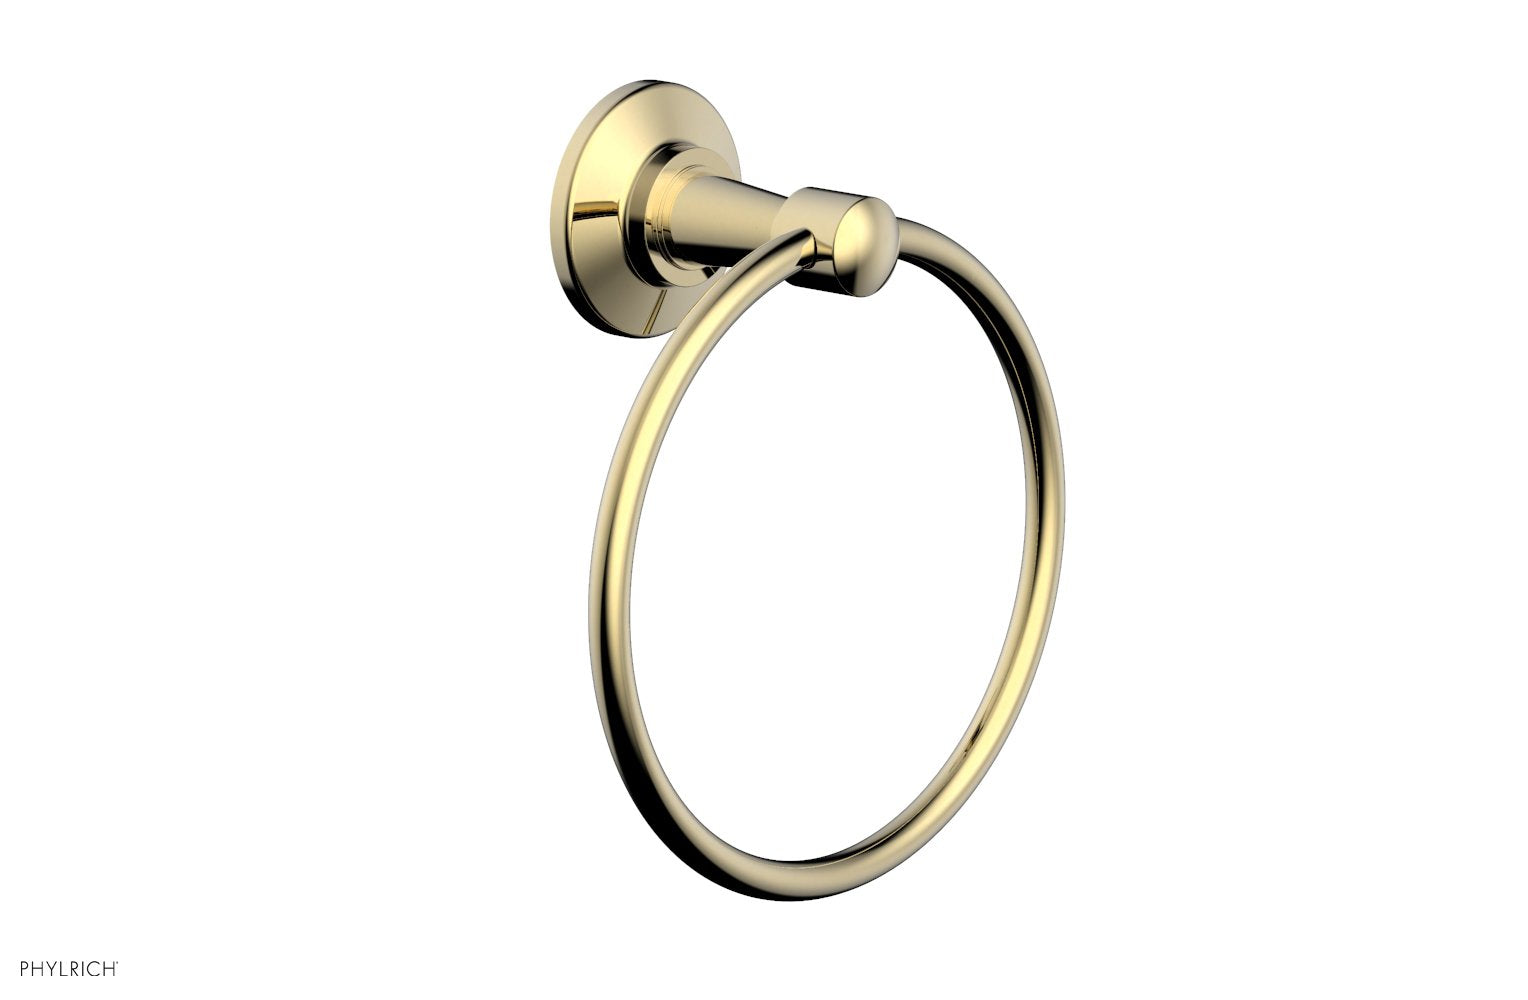 Phylrich WORKS Towel Ring